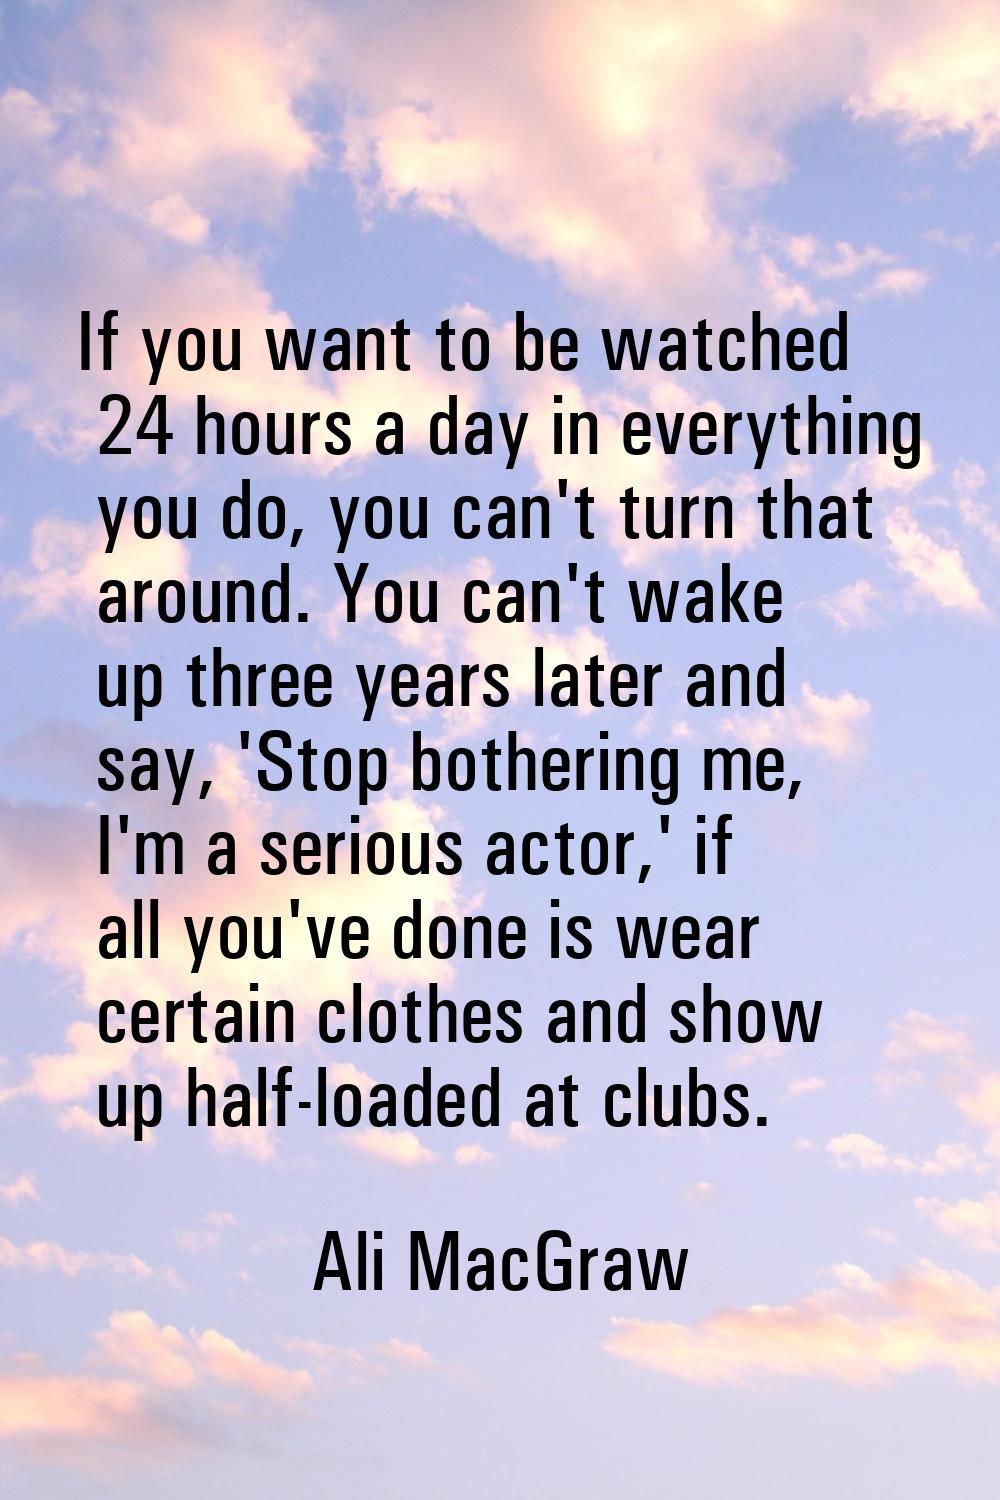 If you want to be watched 24 hours a day in everything you do, you can't turn that around. You can'